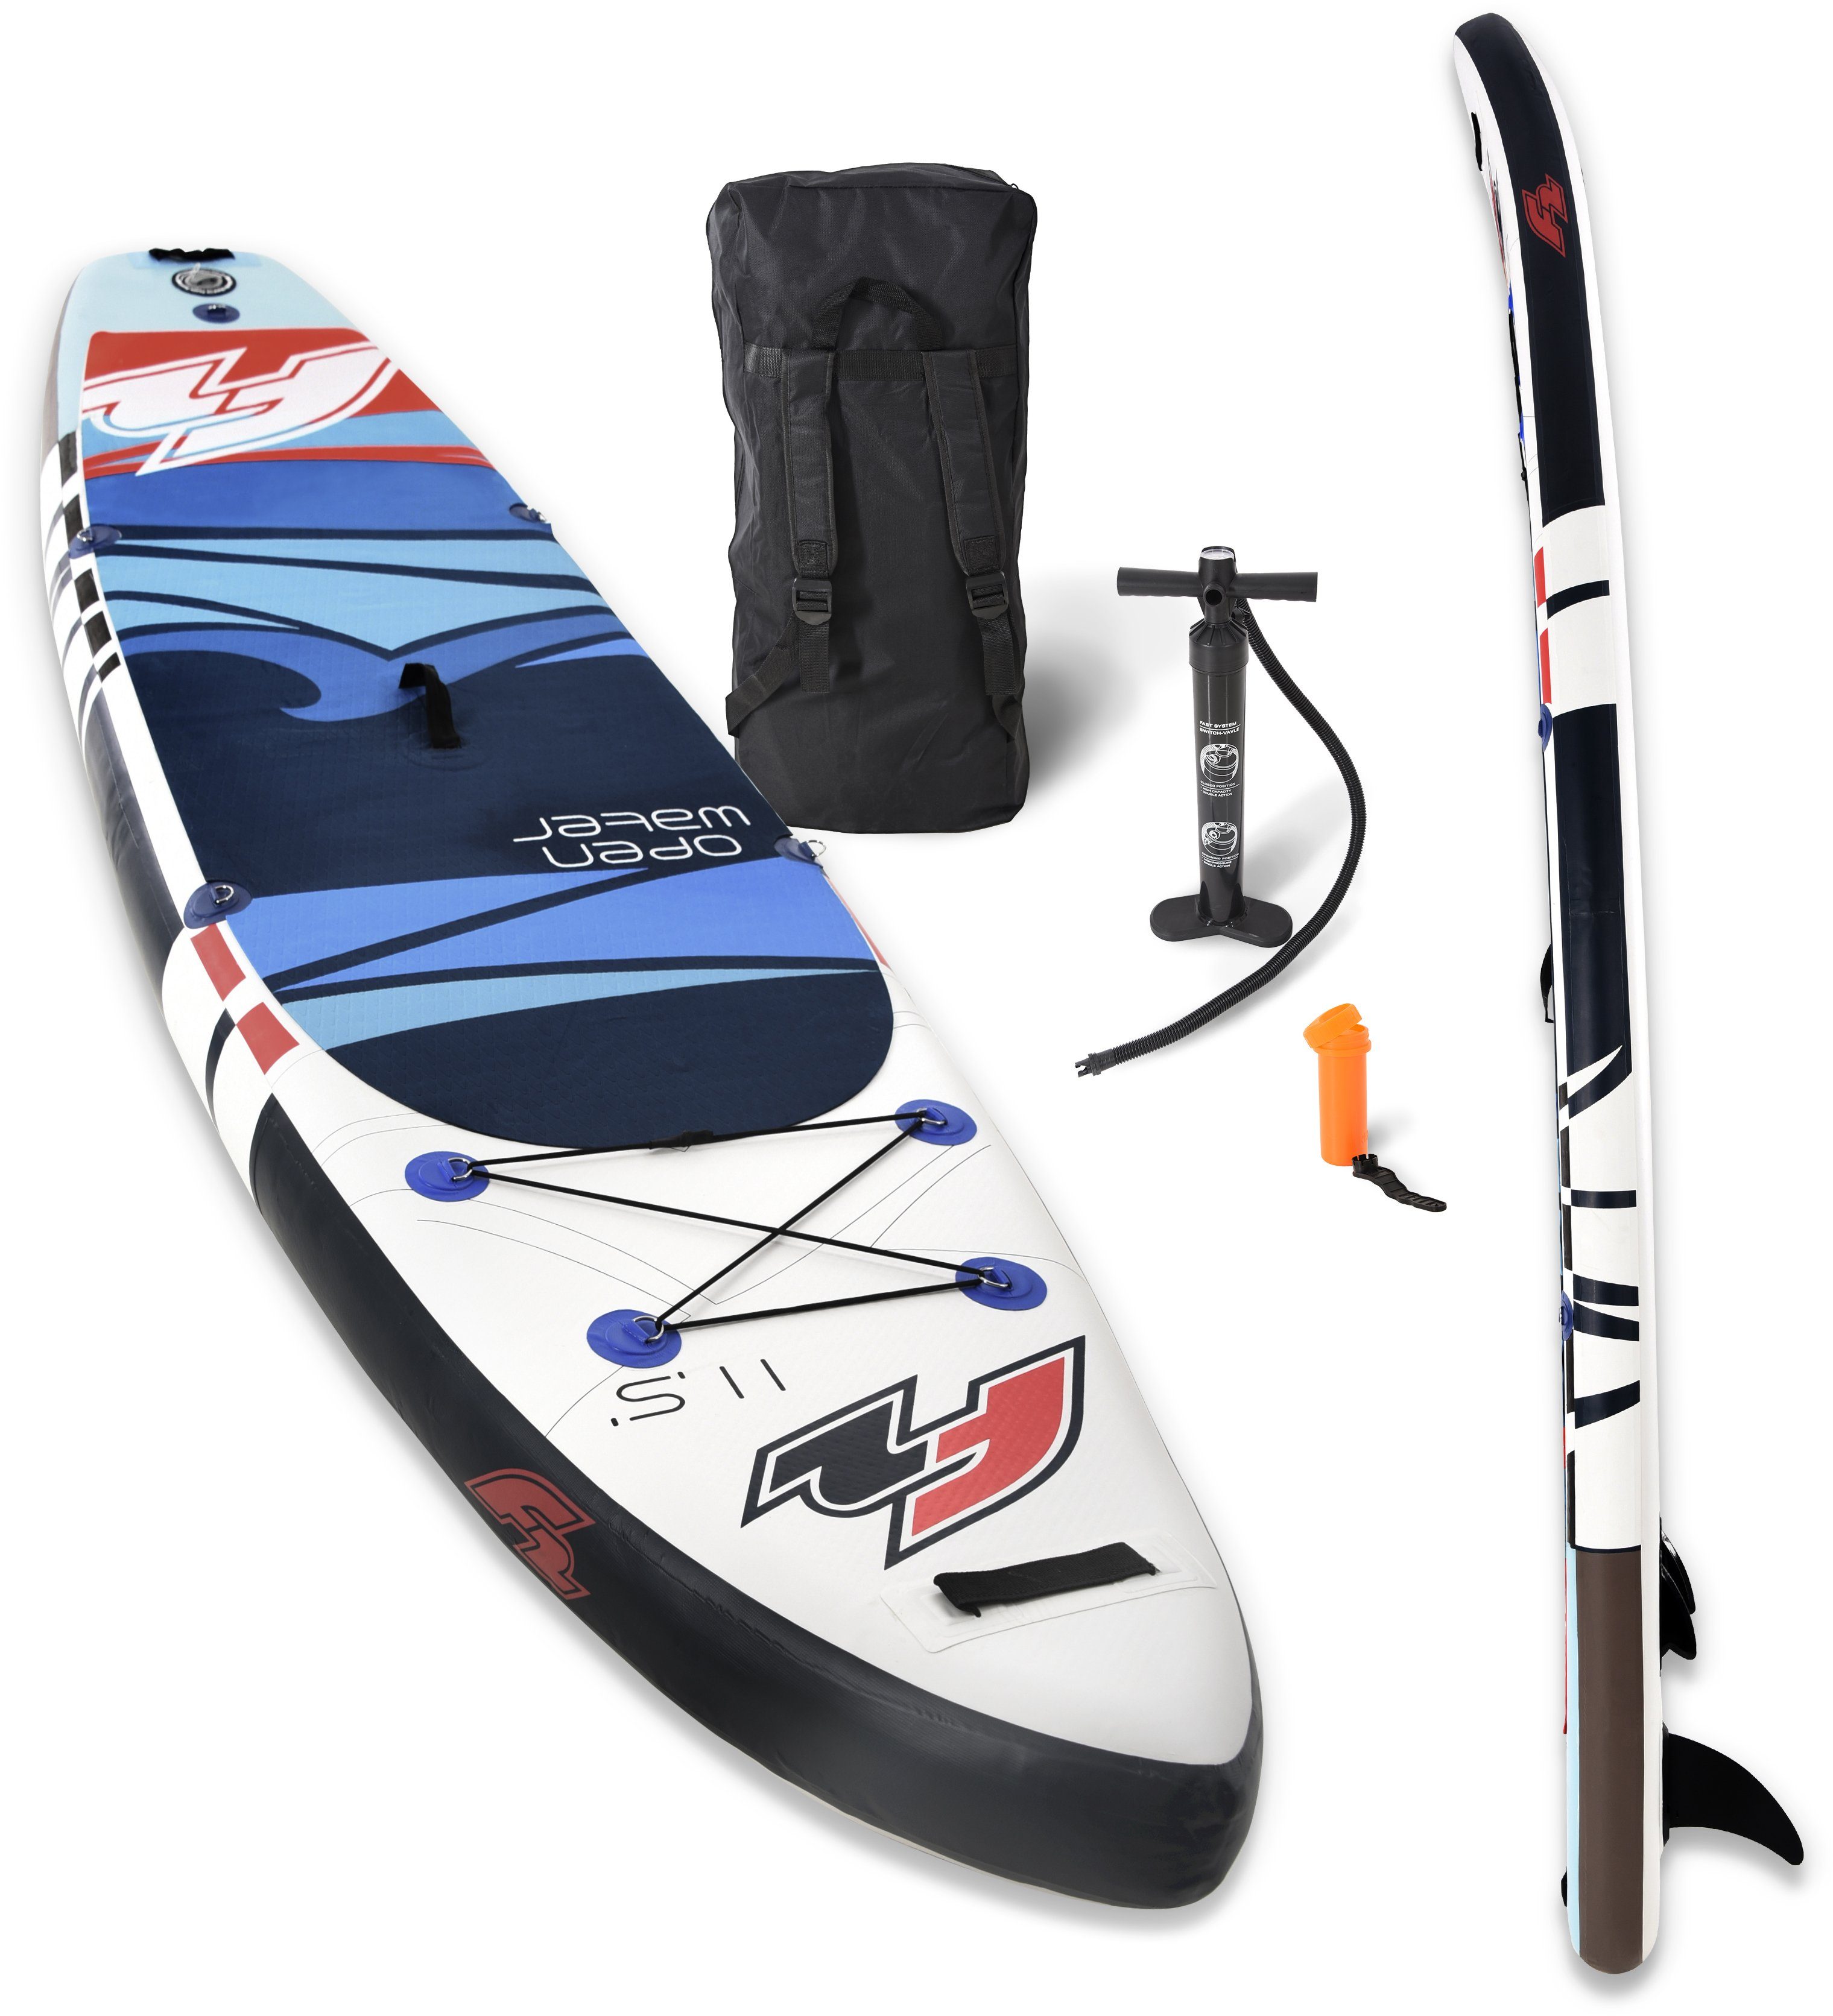 F2 Open Paddel SUP-Board ohne Water